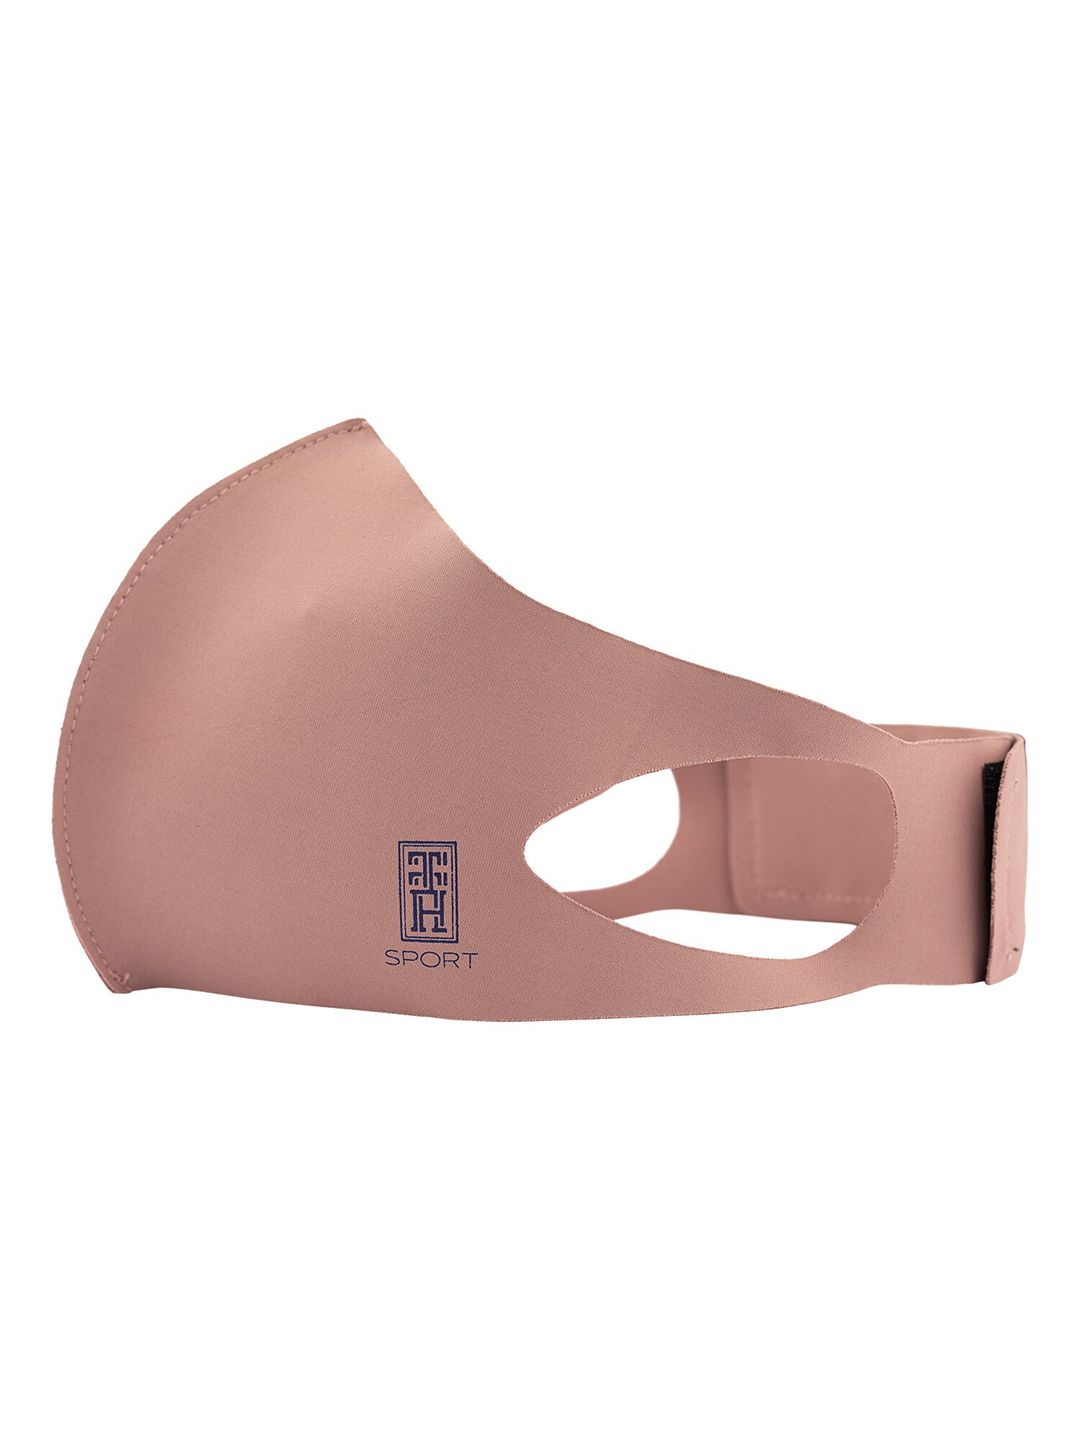 The Tie Hub Pink Sports Mask with Band Price in India